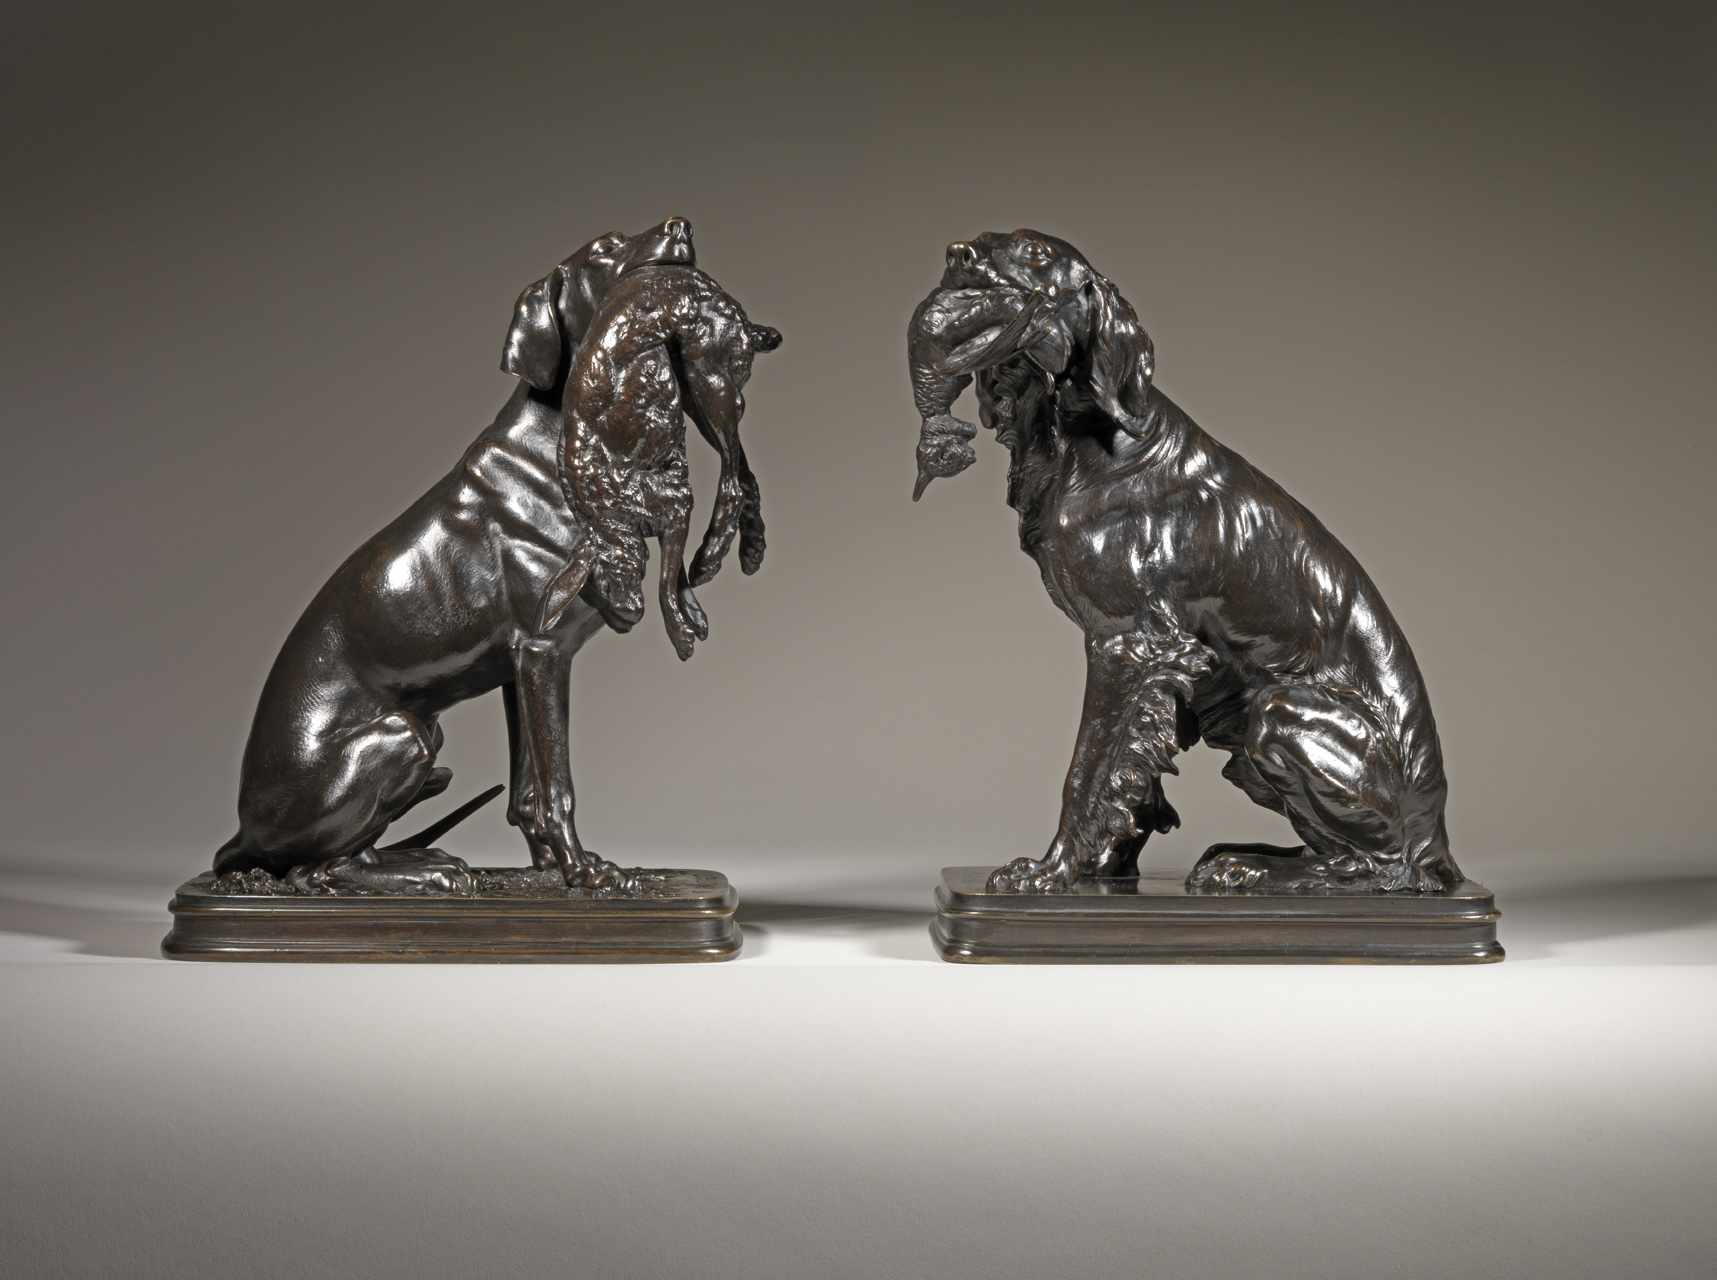 Pointer and Setter with Game, Cabinet version, c. 1860